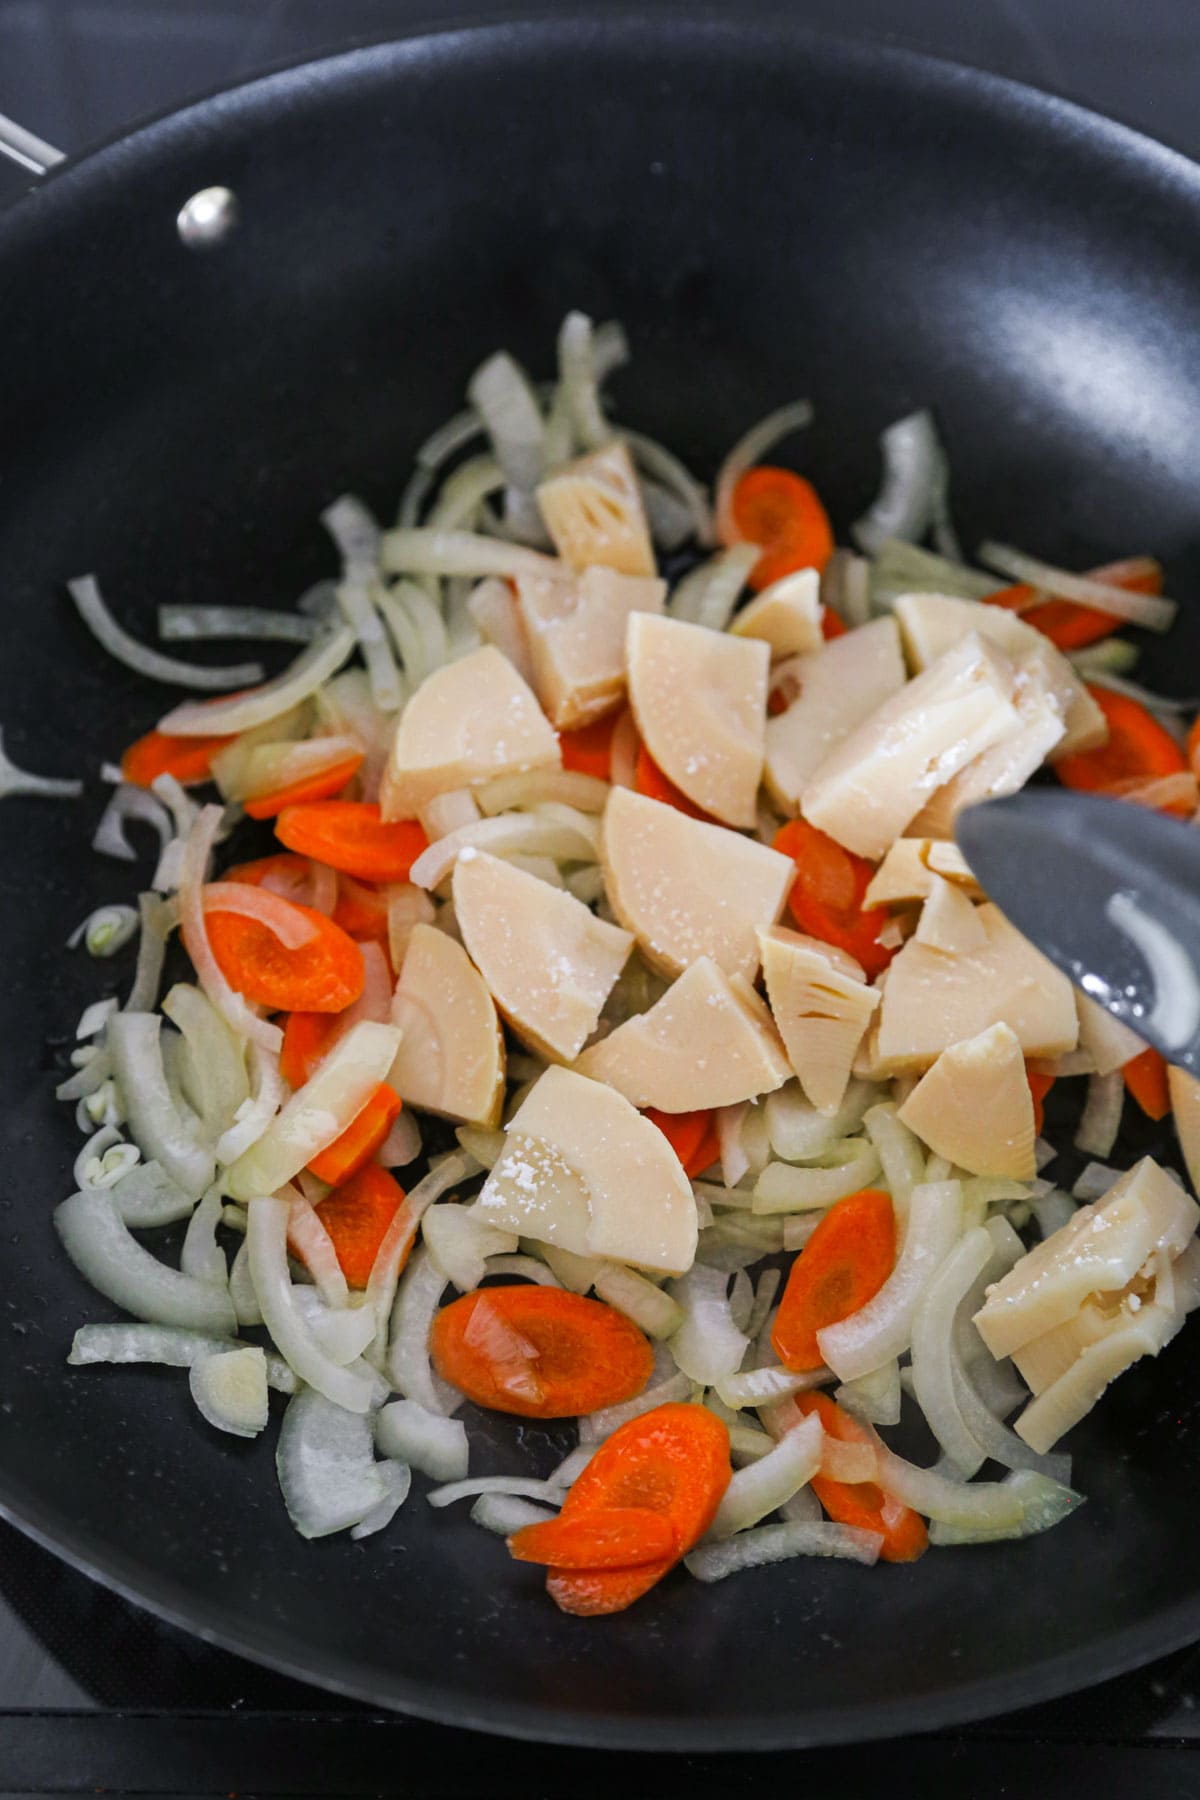 Bamboo shoot, carrots, and onions